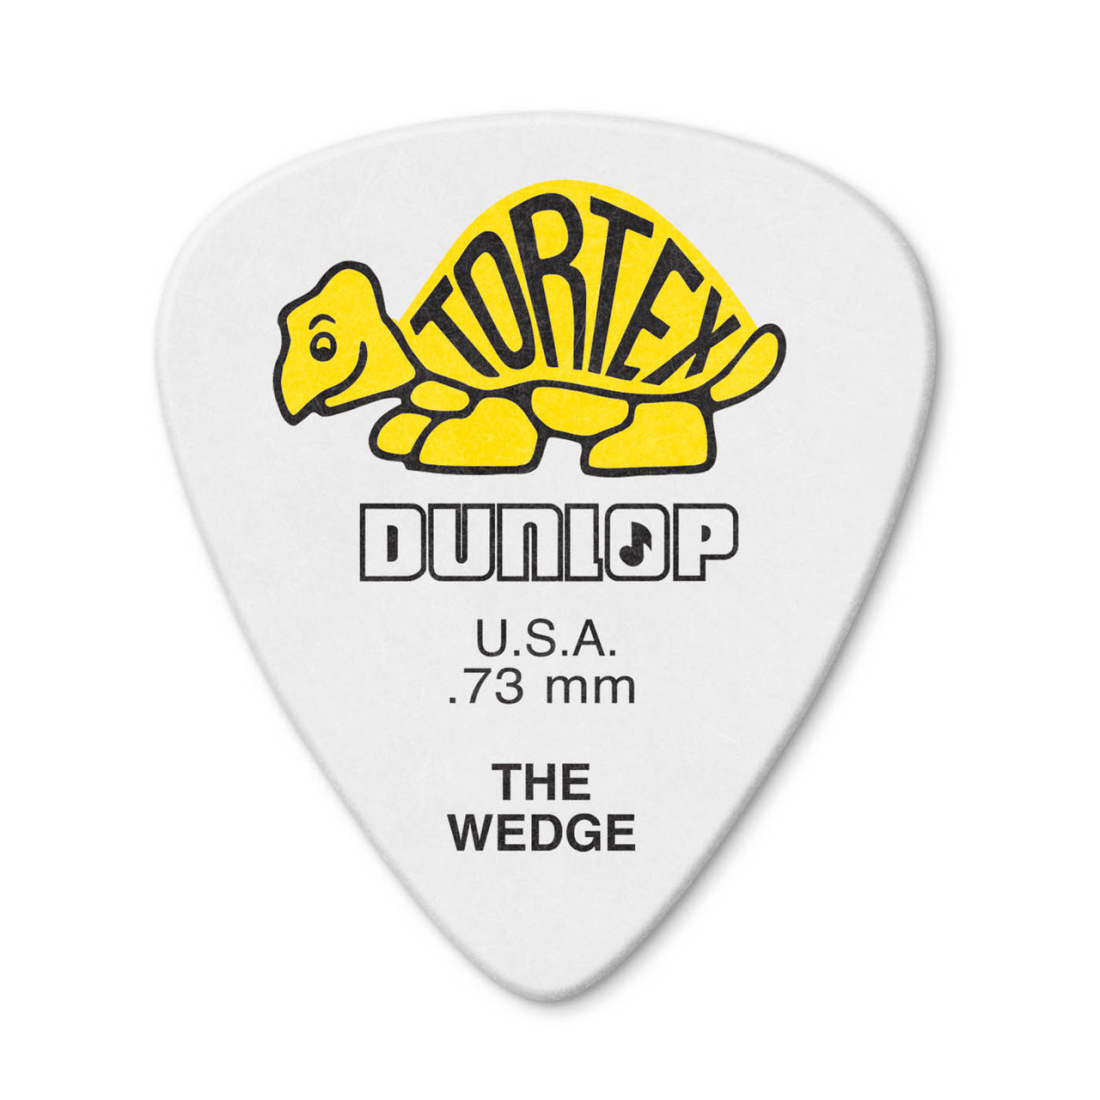 Tortex Wedge Players Pack (72 Pack) - .73mm